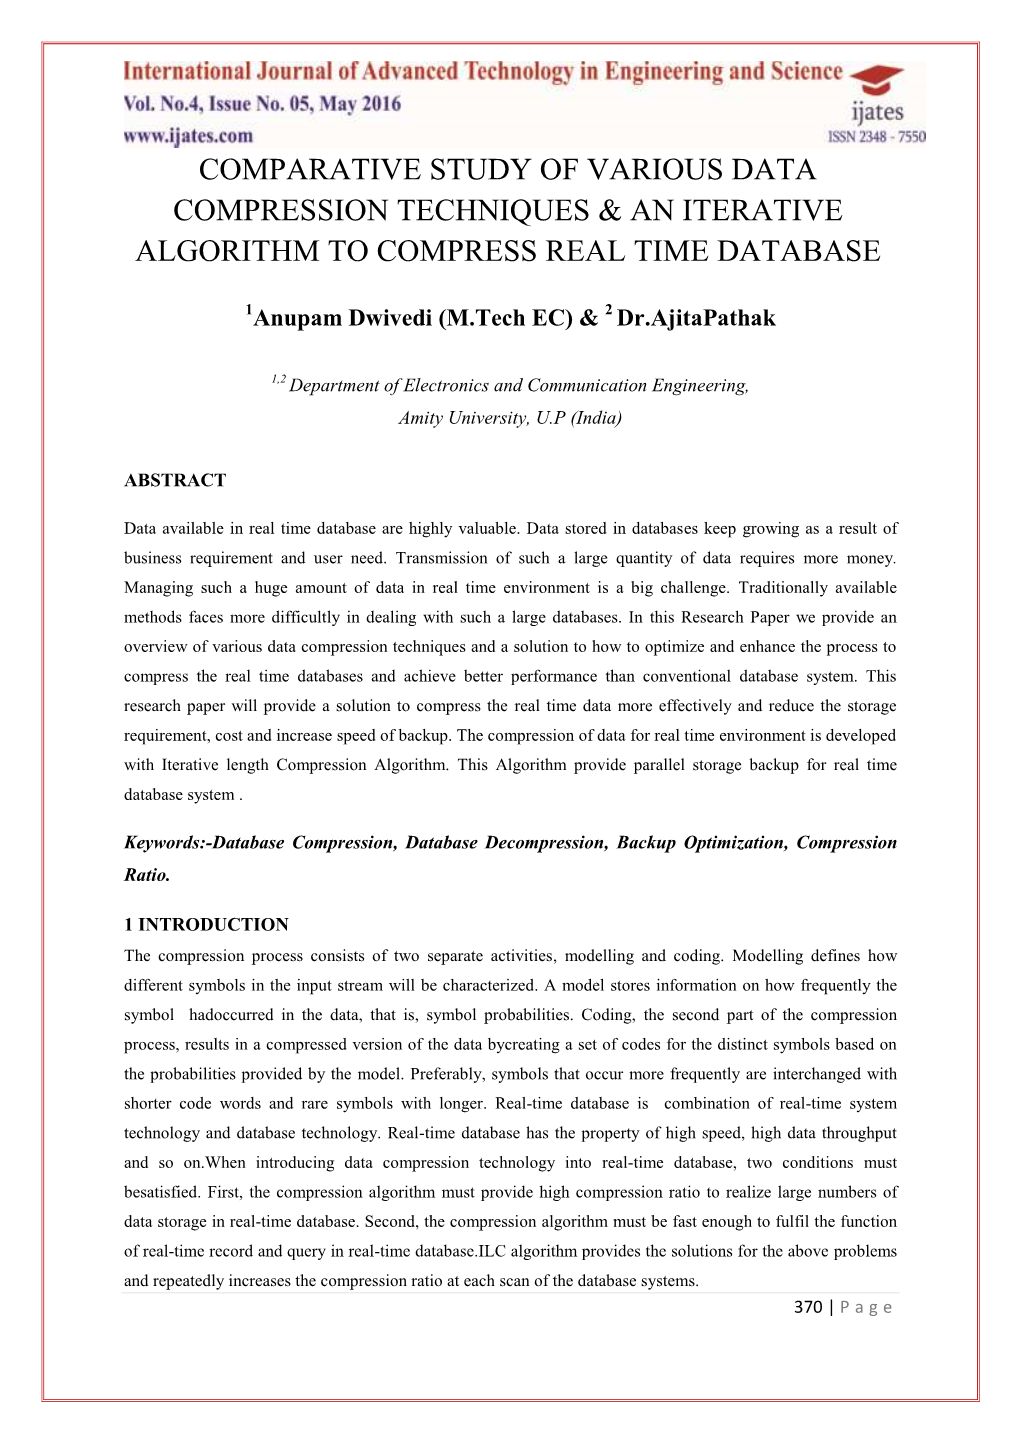 Comparative Study of Various Data Compression Techniques & an Iterative Algorithm to Compress Real Time Database